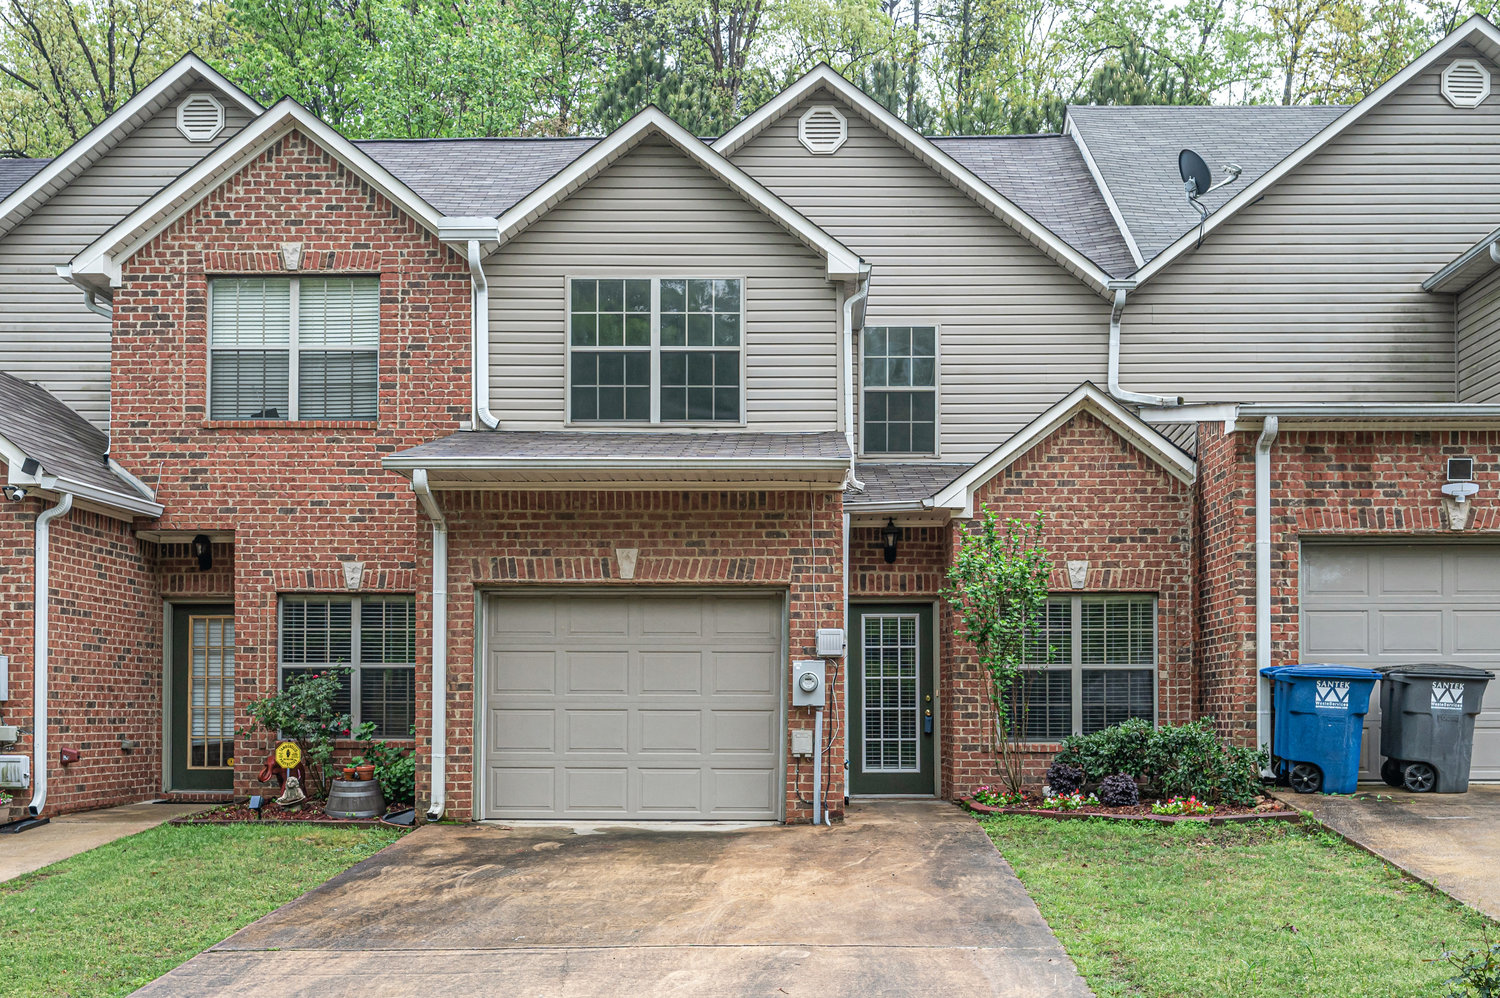 Virtual Tour of Birmingham Metro Real Estate Listing For Sale | 412 Highland Cove Drive, Hoover, AL 35226